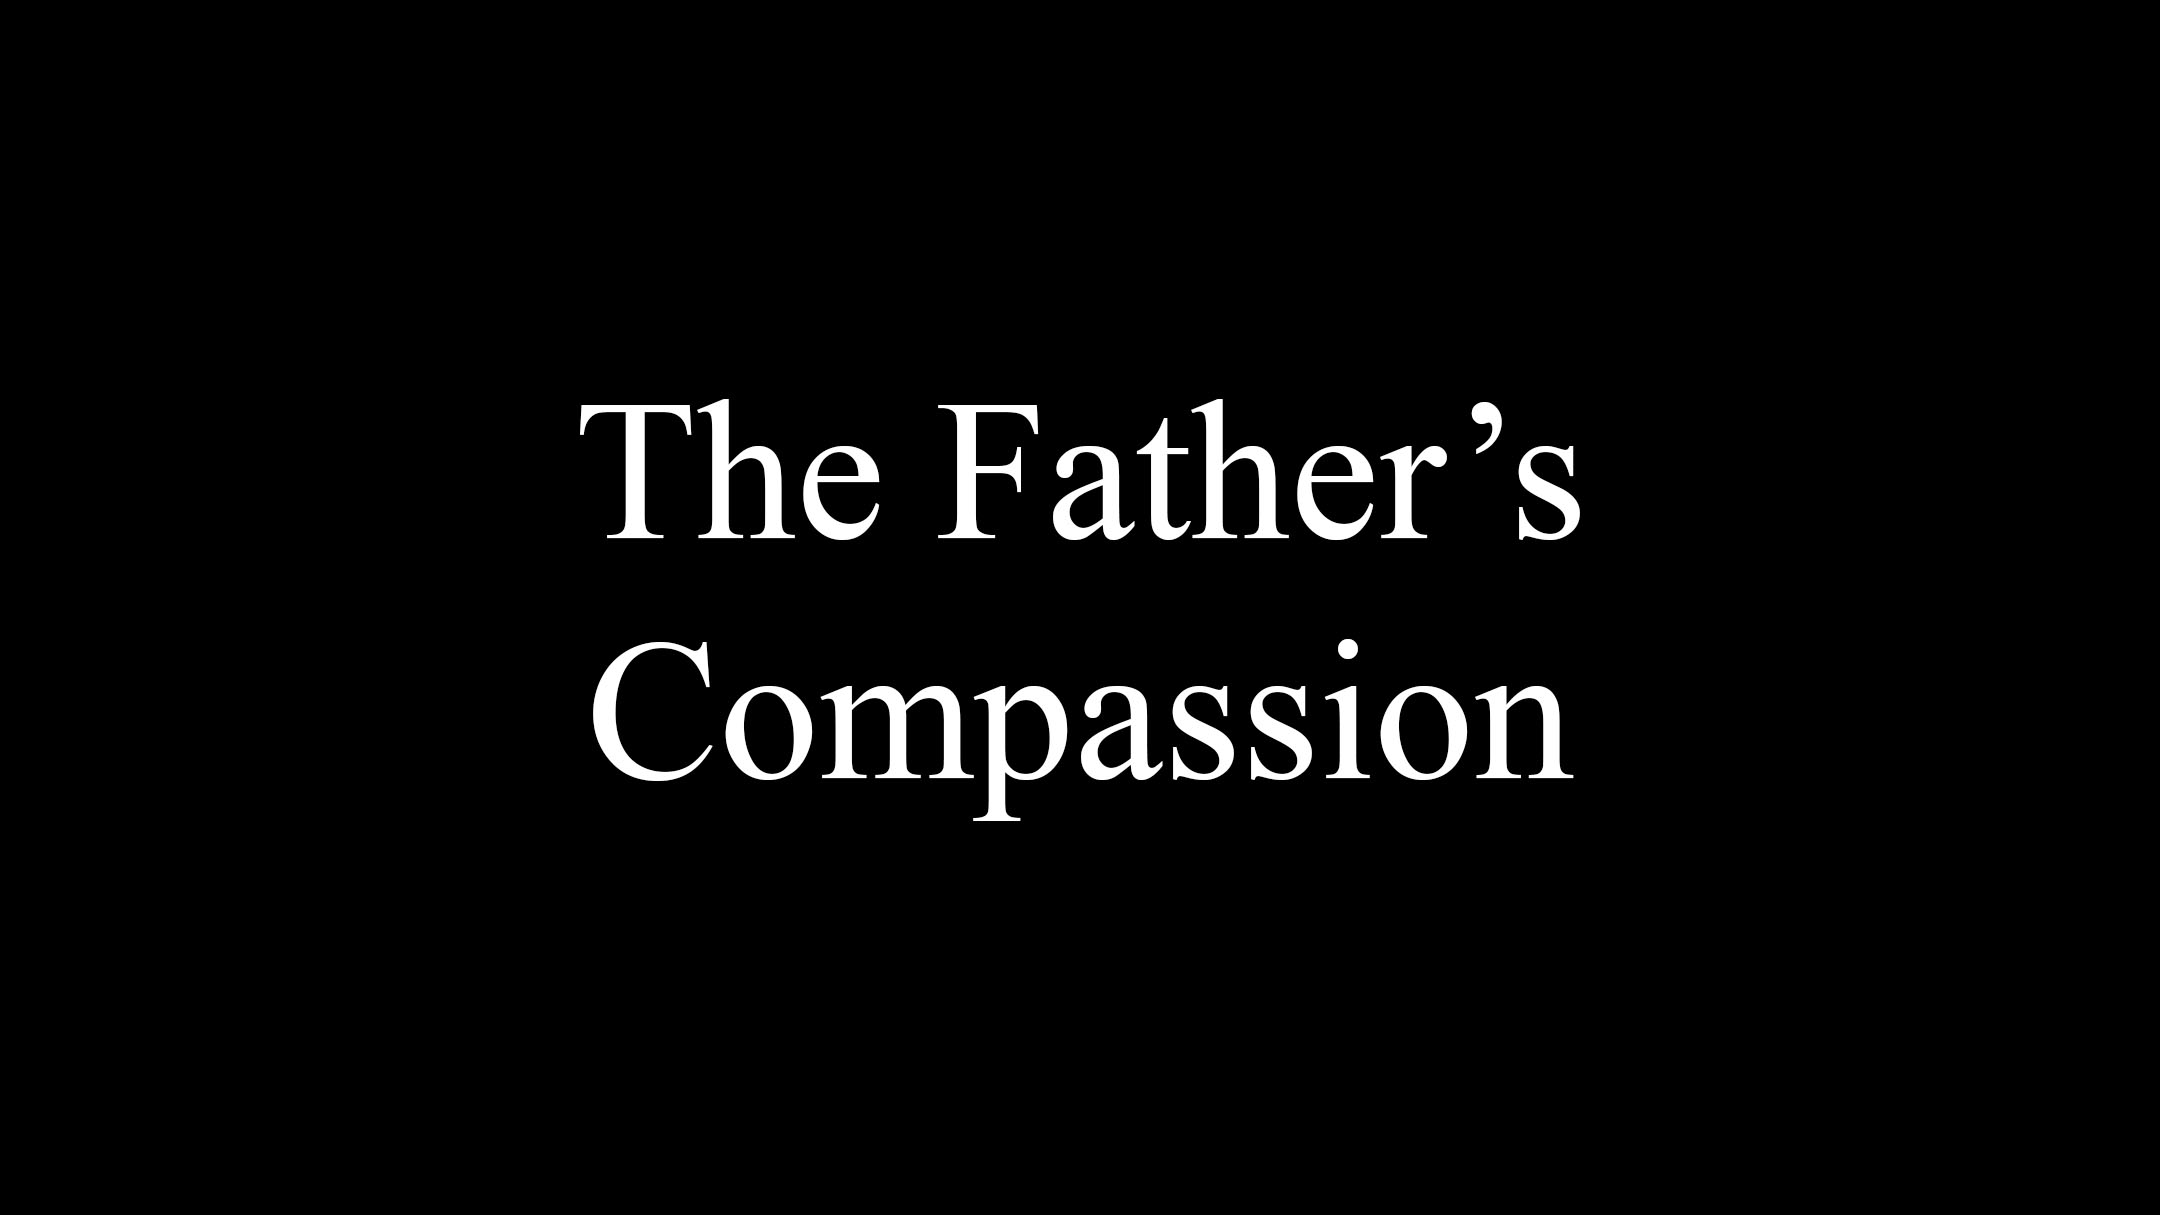 The Father's Compassion